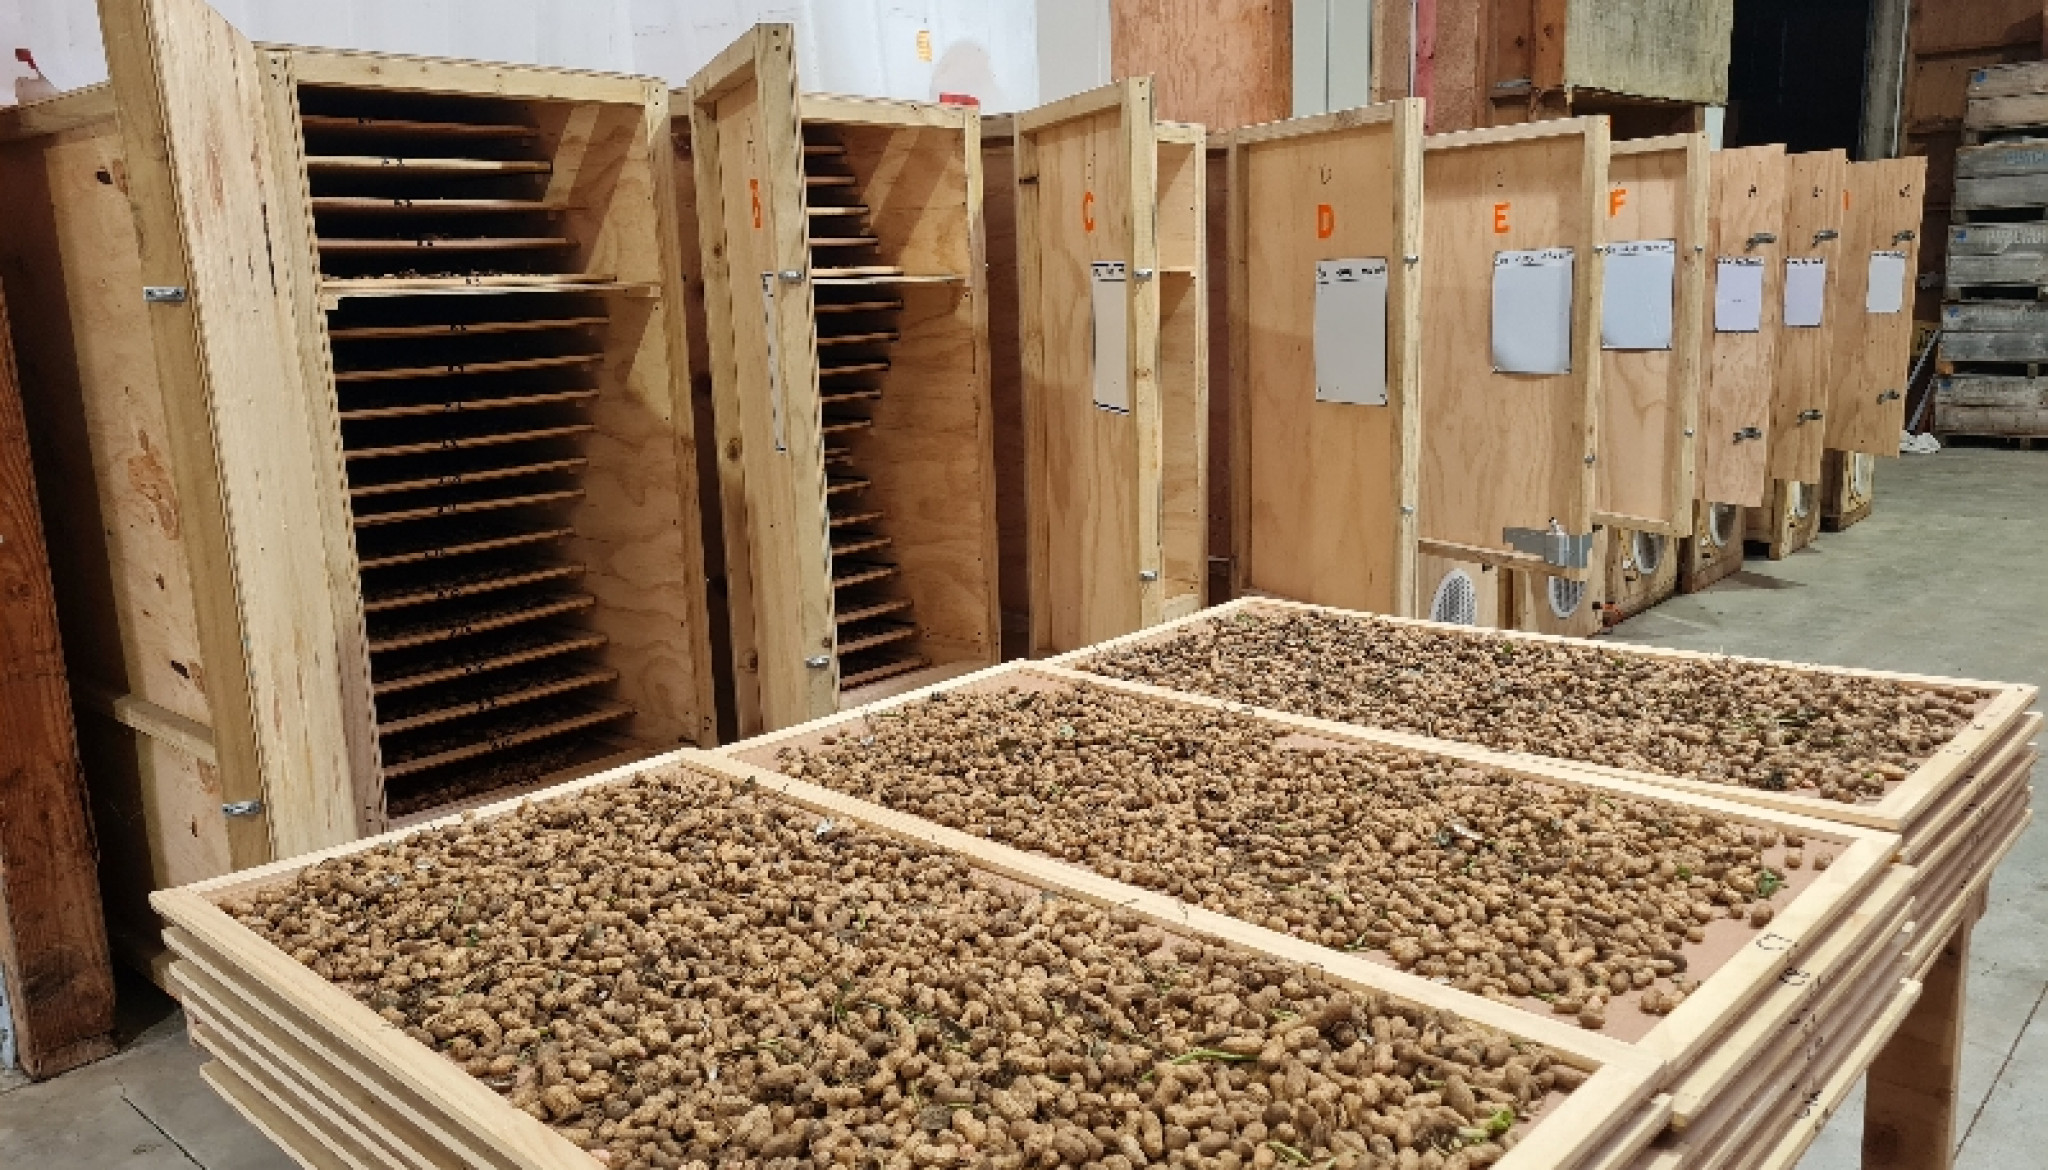 Peanuts drying before being roasted.